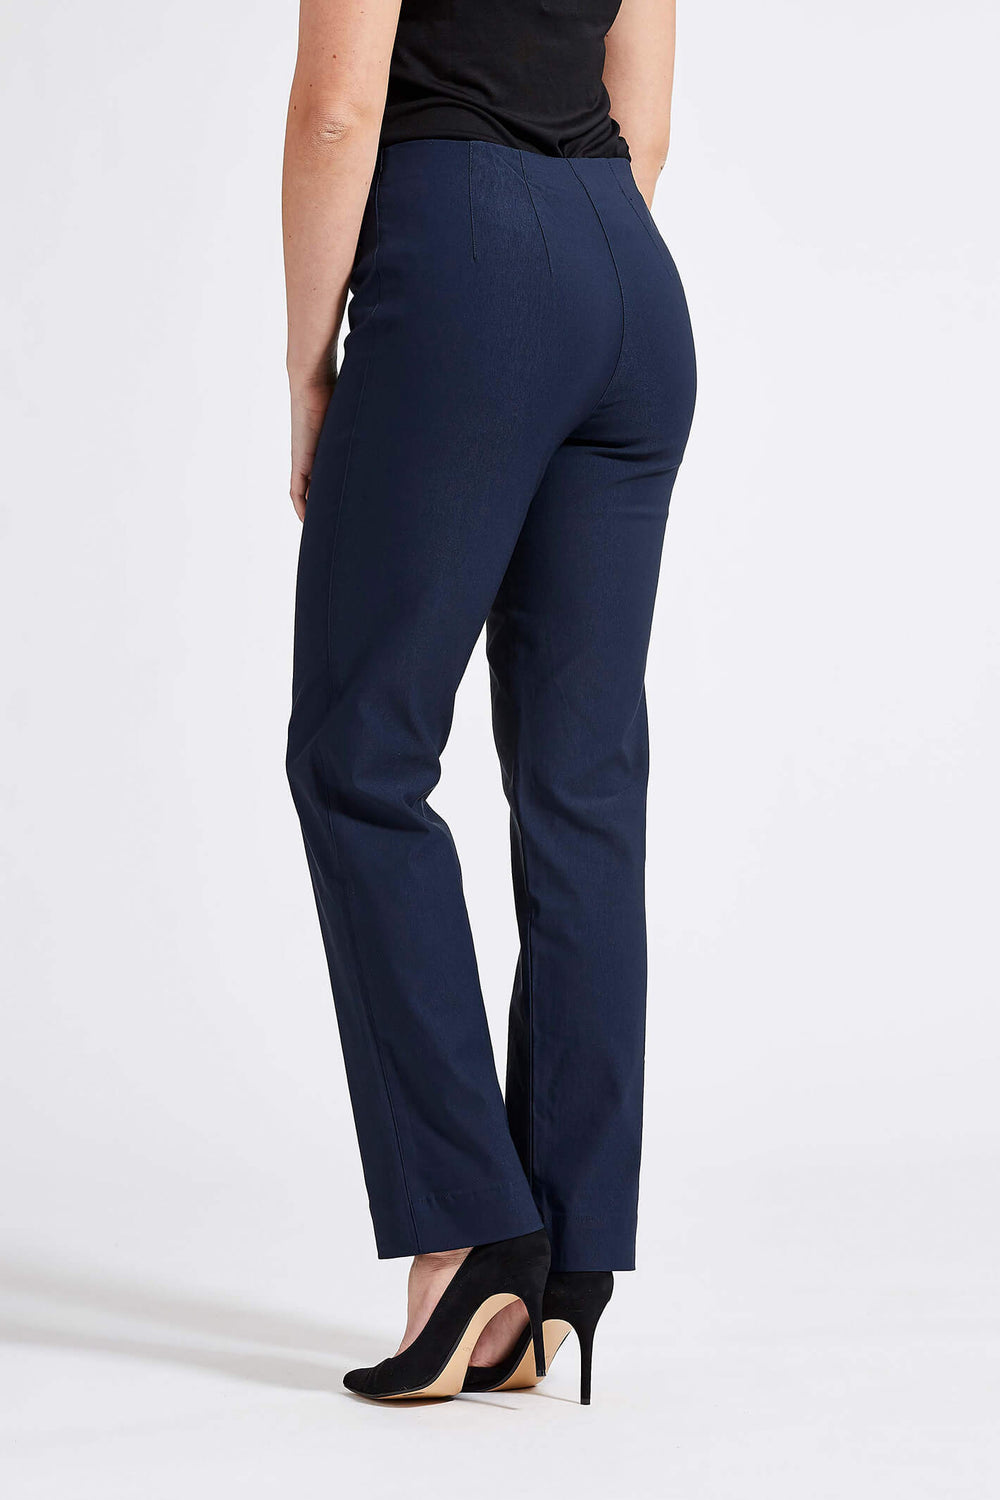 LauRie Stella Emma 28014 49970 Navy Blue Trousers - Shirley Allum